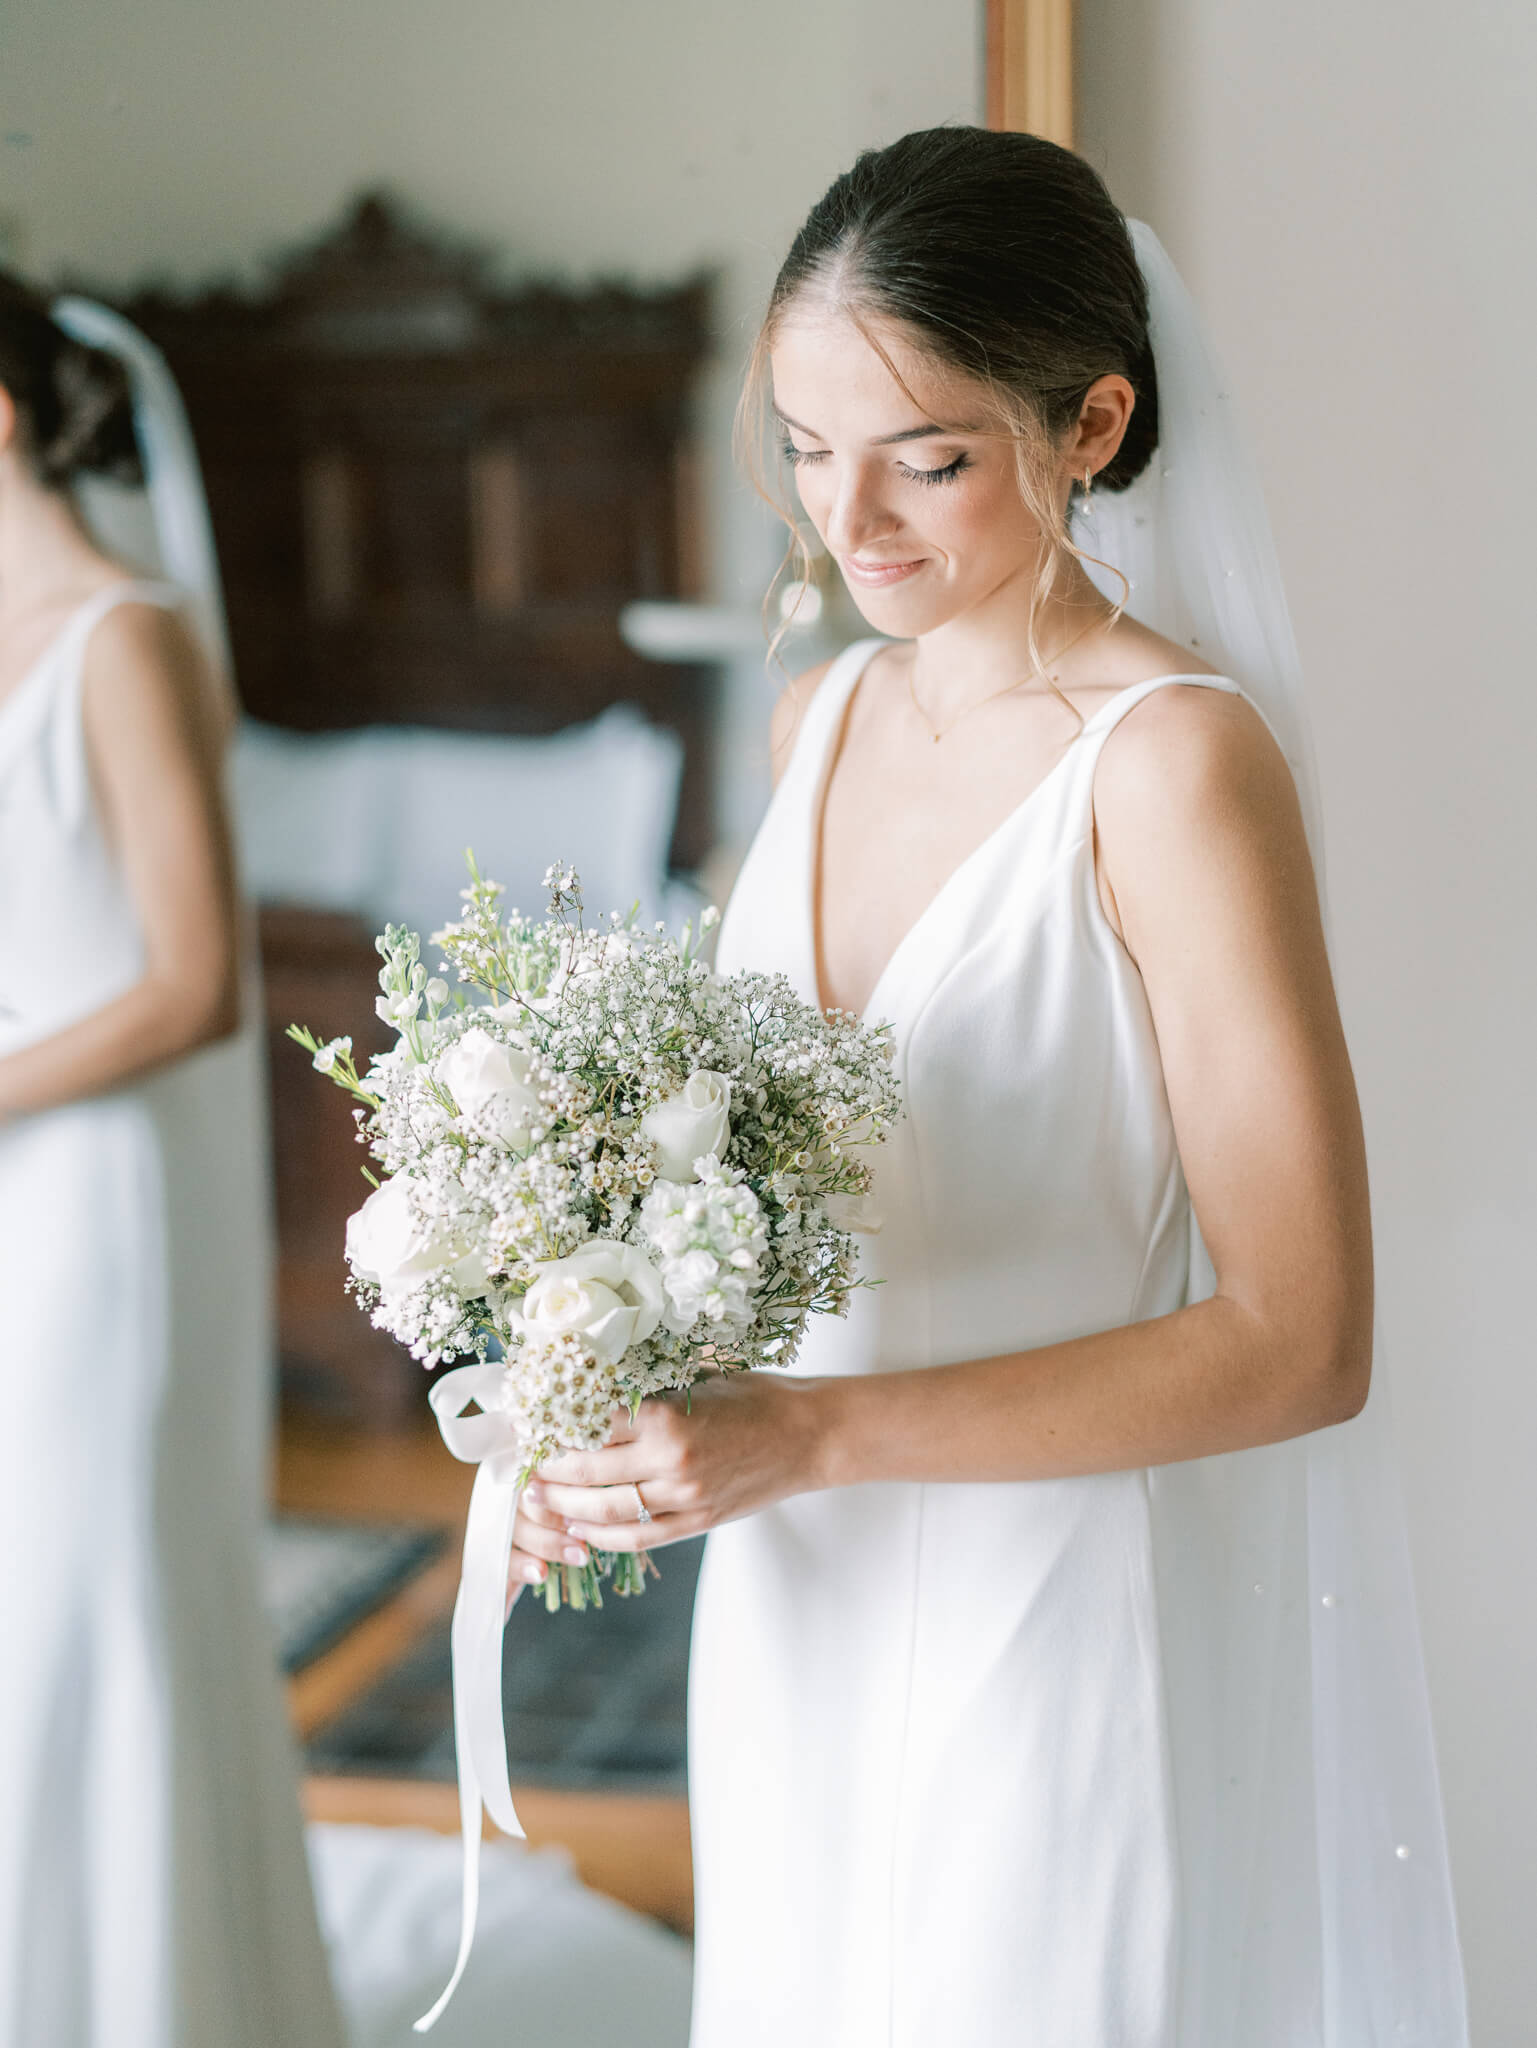 A bride looking down at her bouquet in the getting ready suite of Springfield Manor wedding venue.